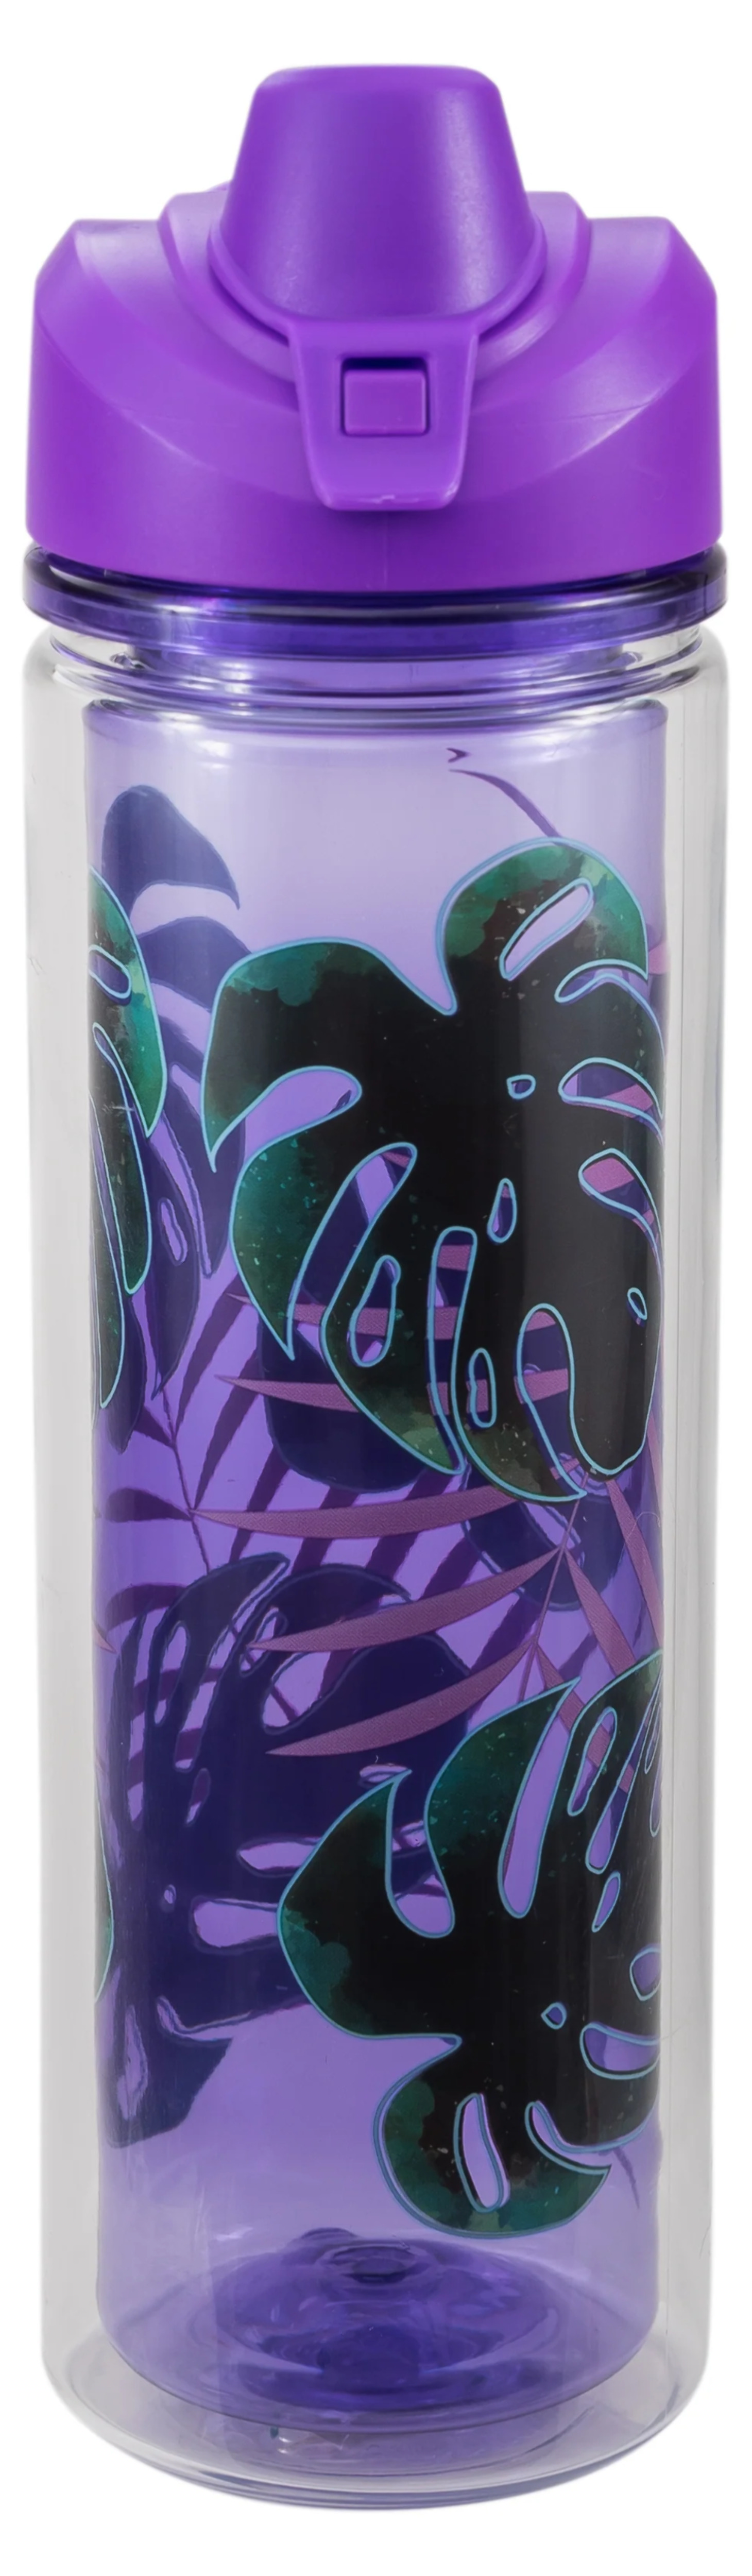 COOL GEAR 2-Pack 20 oz Essence Chugger Water Bottle with Wide Mouth & Flip Cap Design - Stay Wild/Fierce - image 4 of 6